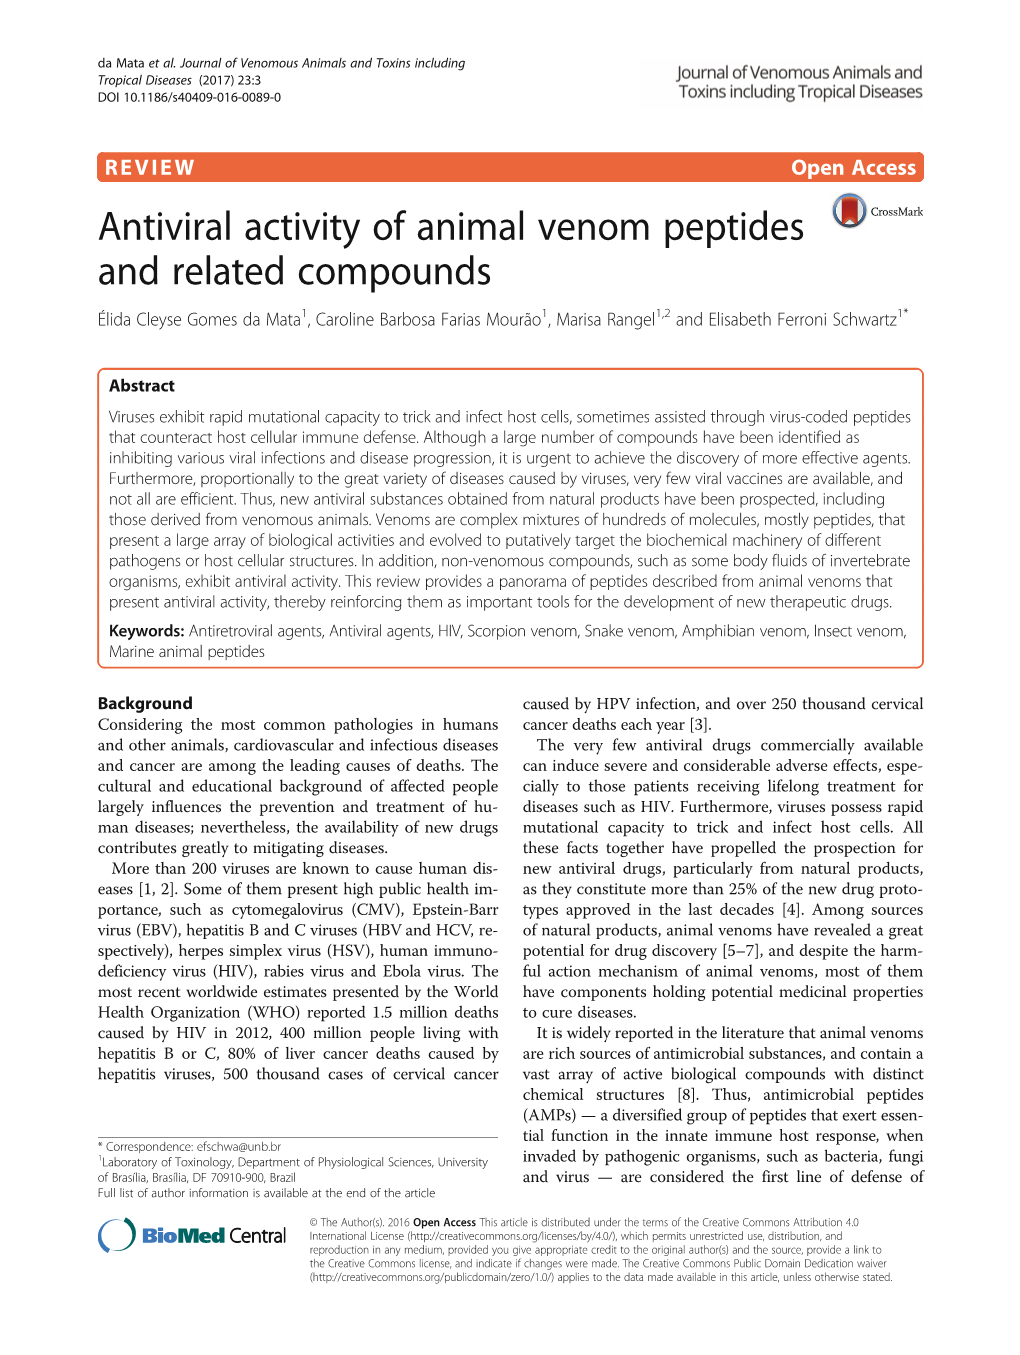 Antiviral Activity of Animal Venom Peptides and Related Compounds